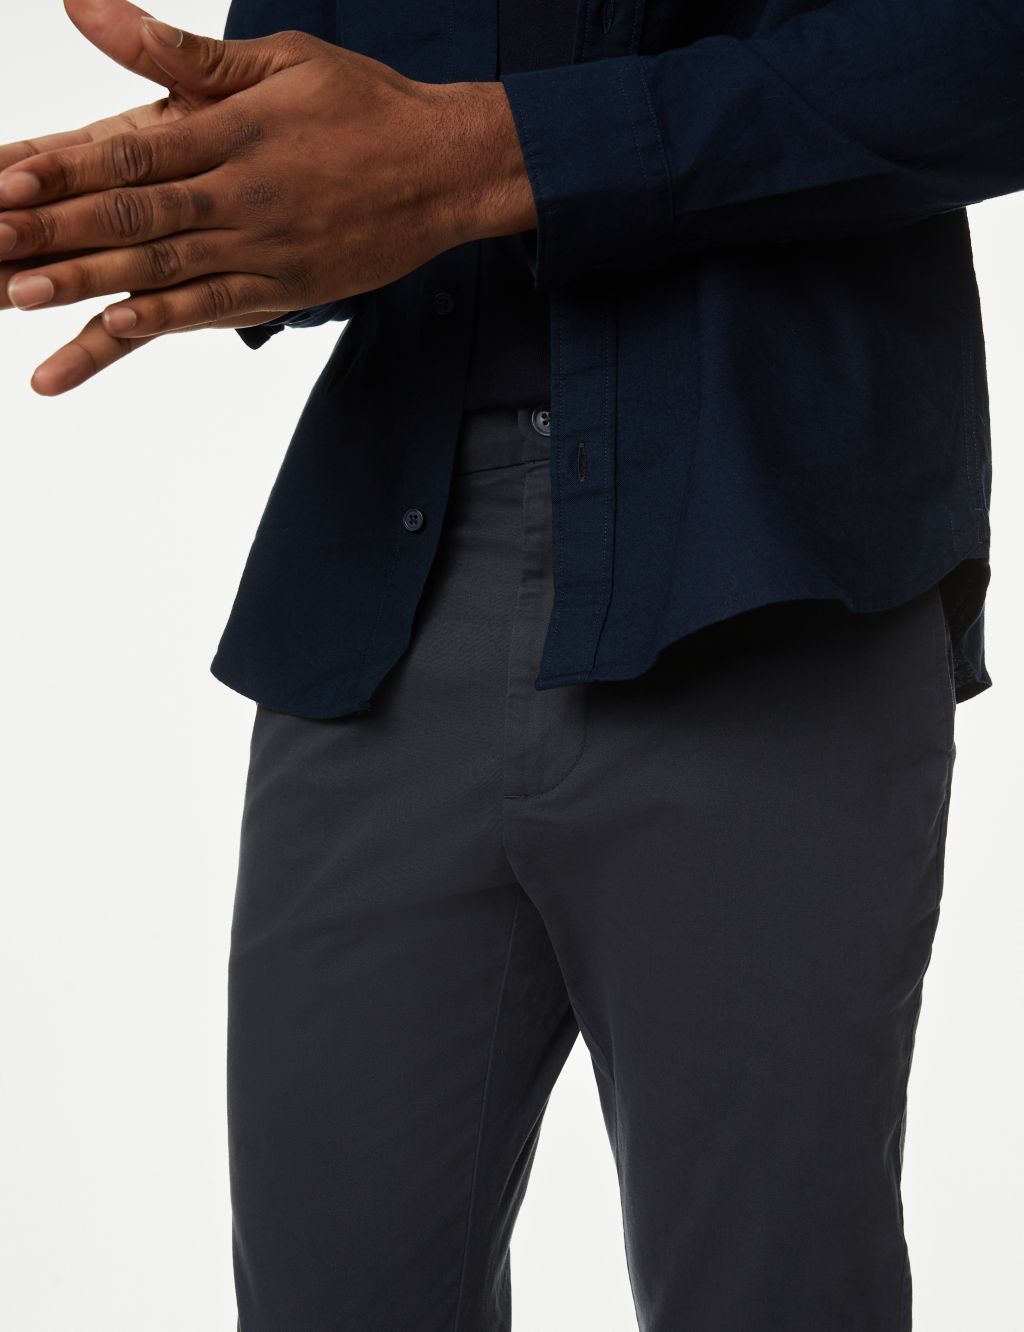 Skinny Fit Stretch Chinos image 4